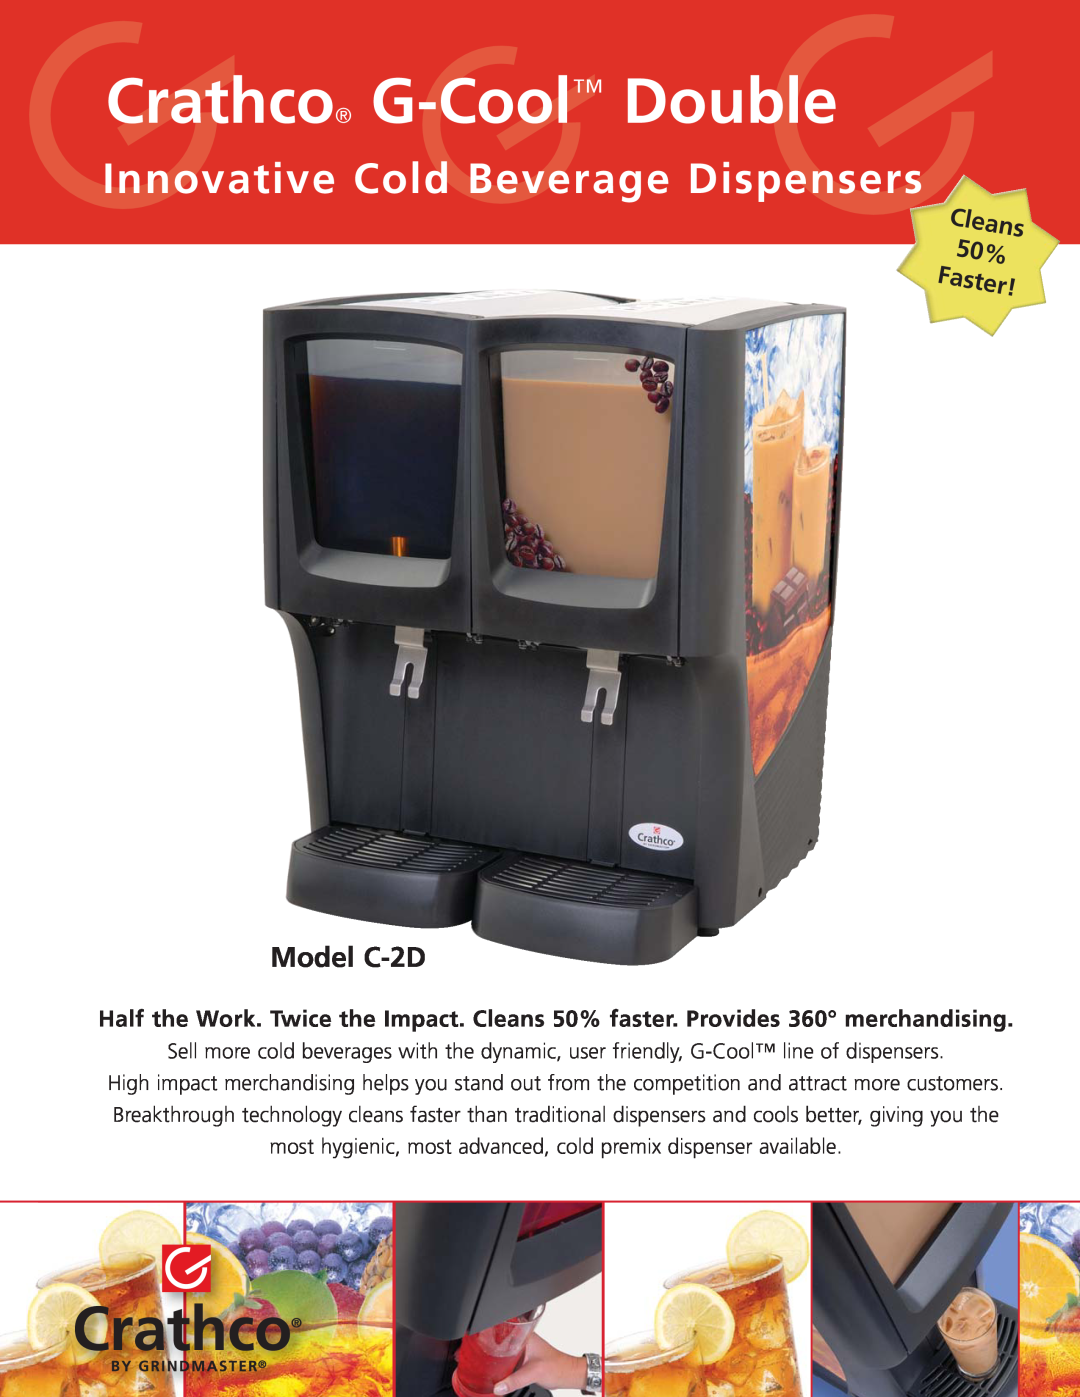 Grindmaster manual Model C-2D, Crathco G-Cool Double, Innovative Cold Beverage Dispensers, Cleans 50% Faster 